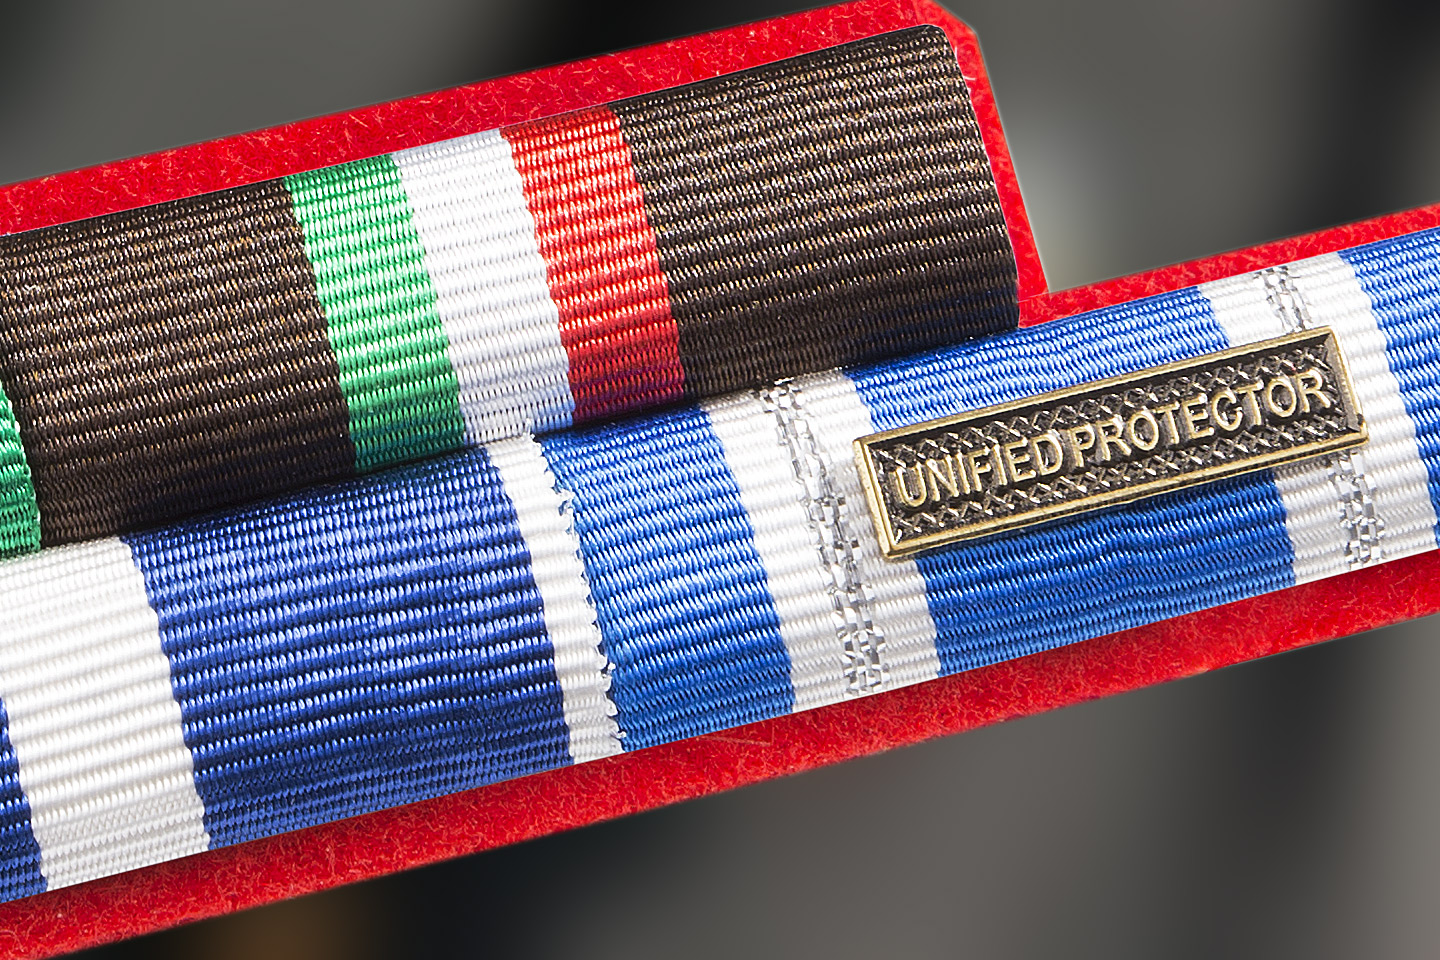 Accessories for Medals